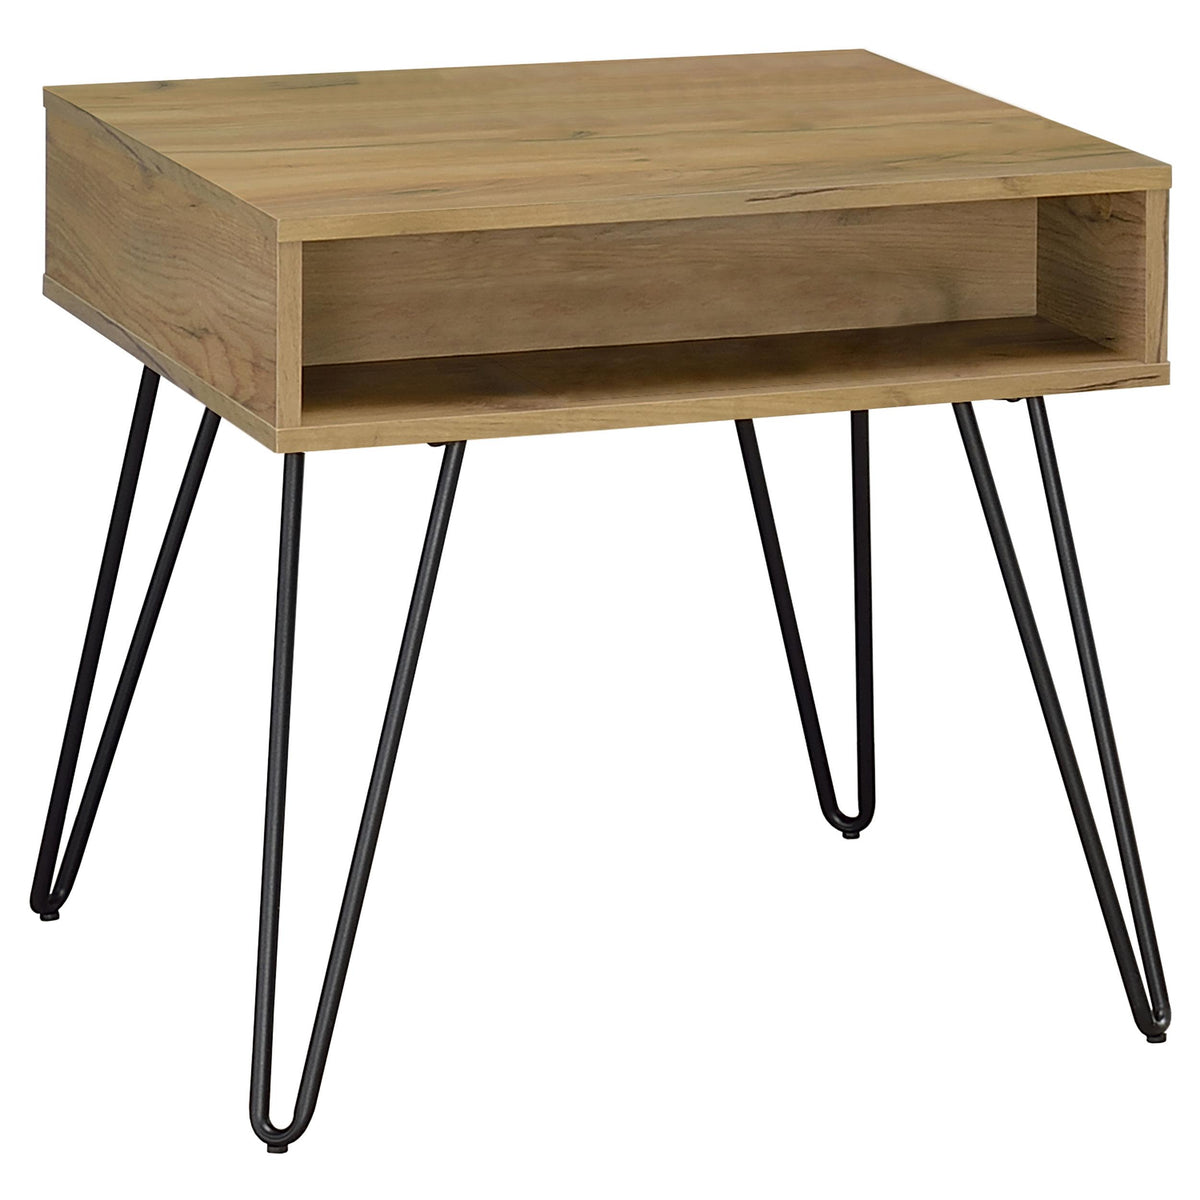 Fanning Square End Table with Open Compartment Golden Oak and Black Fanning Square End Table with Open Compartment Golden Oak and Black Half Price Furniture